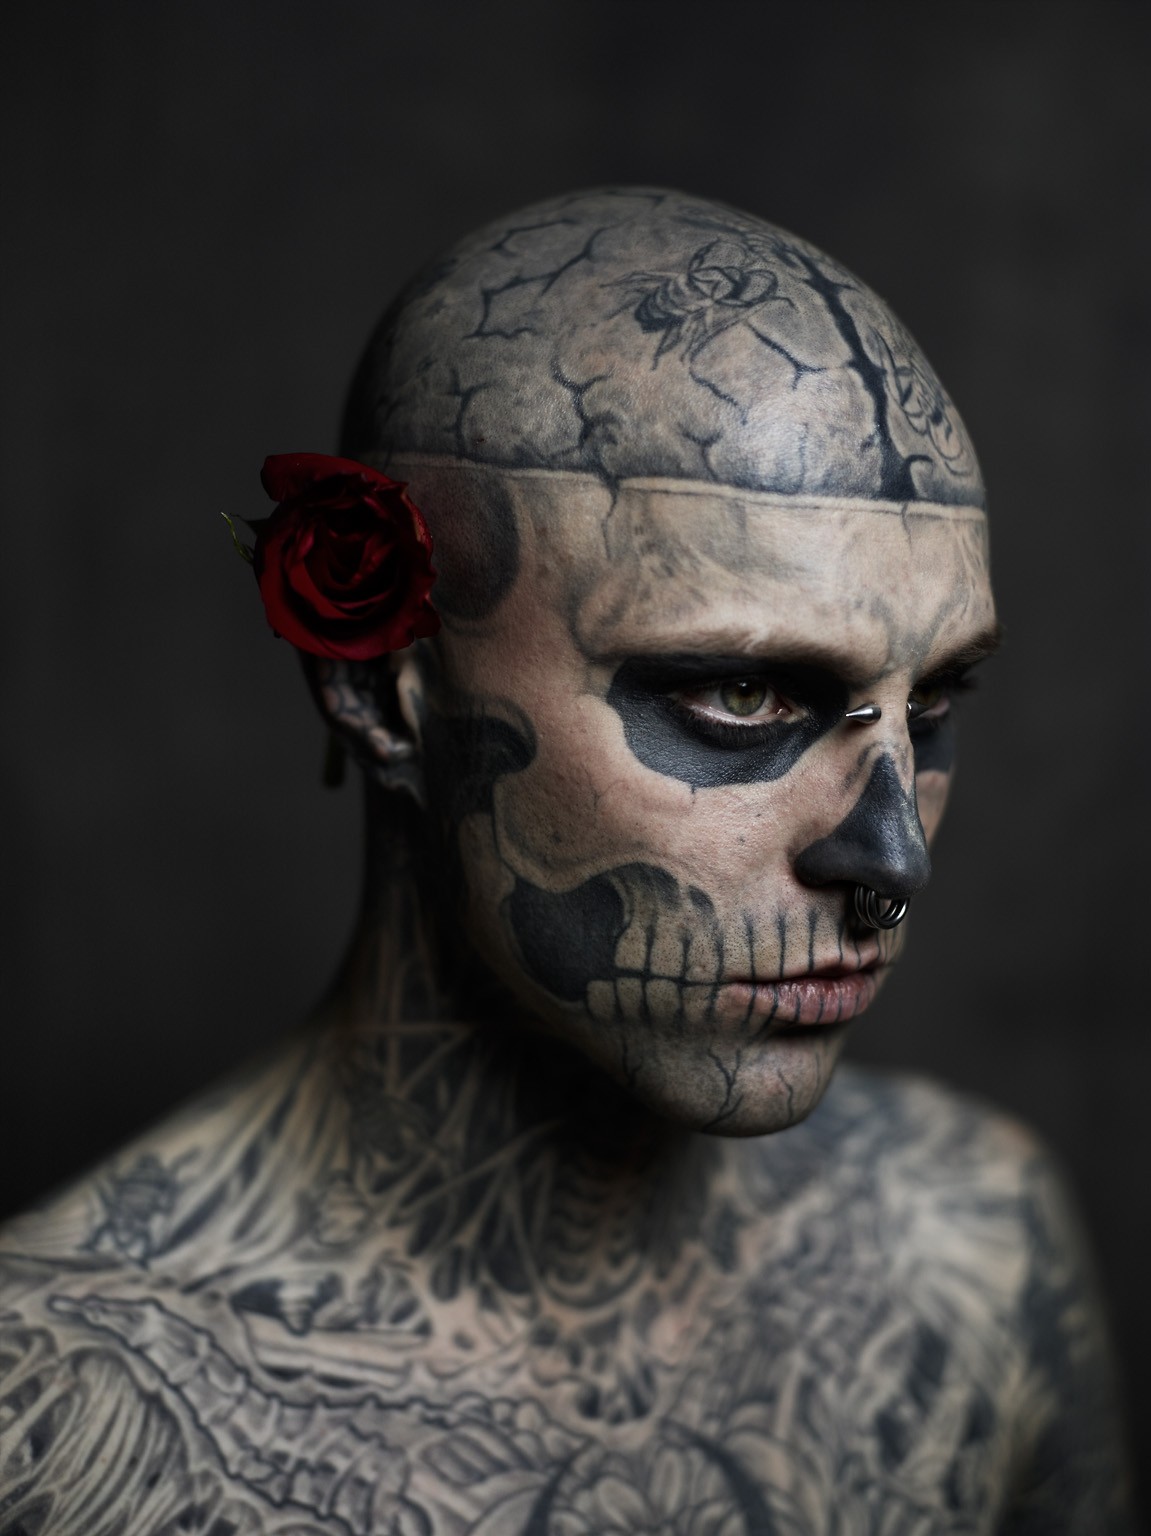 Men Face Simple Background Looking Away Portrait Tattoo Rico The Zombie Flowers Rose Piercing Pierce 1151x1536